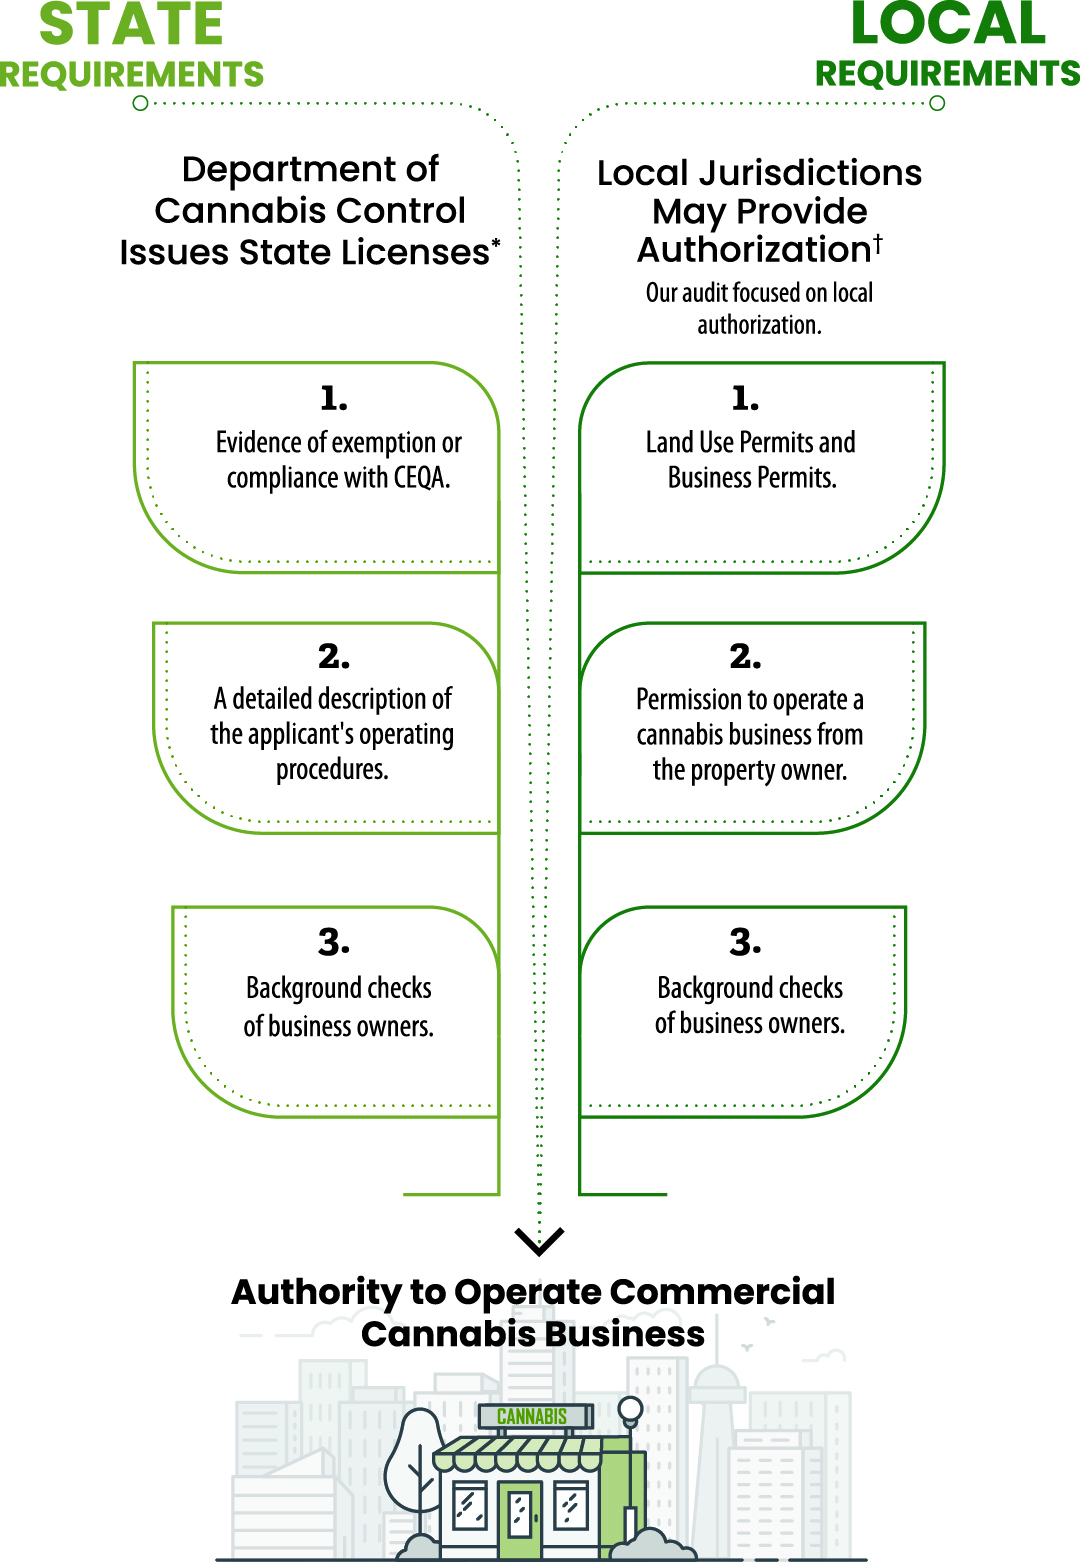 In order to legally operate a commercial cannabis business, the operator needs to obtain both a state license and authorization from the local jurisdiction in which they plan to operate.